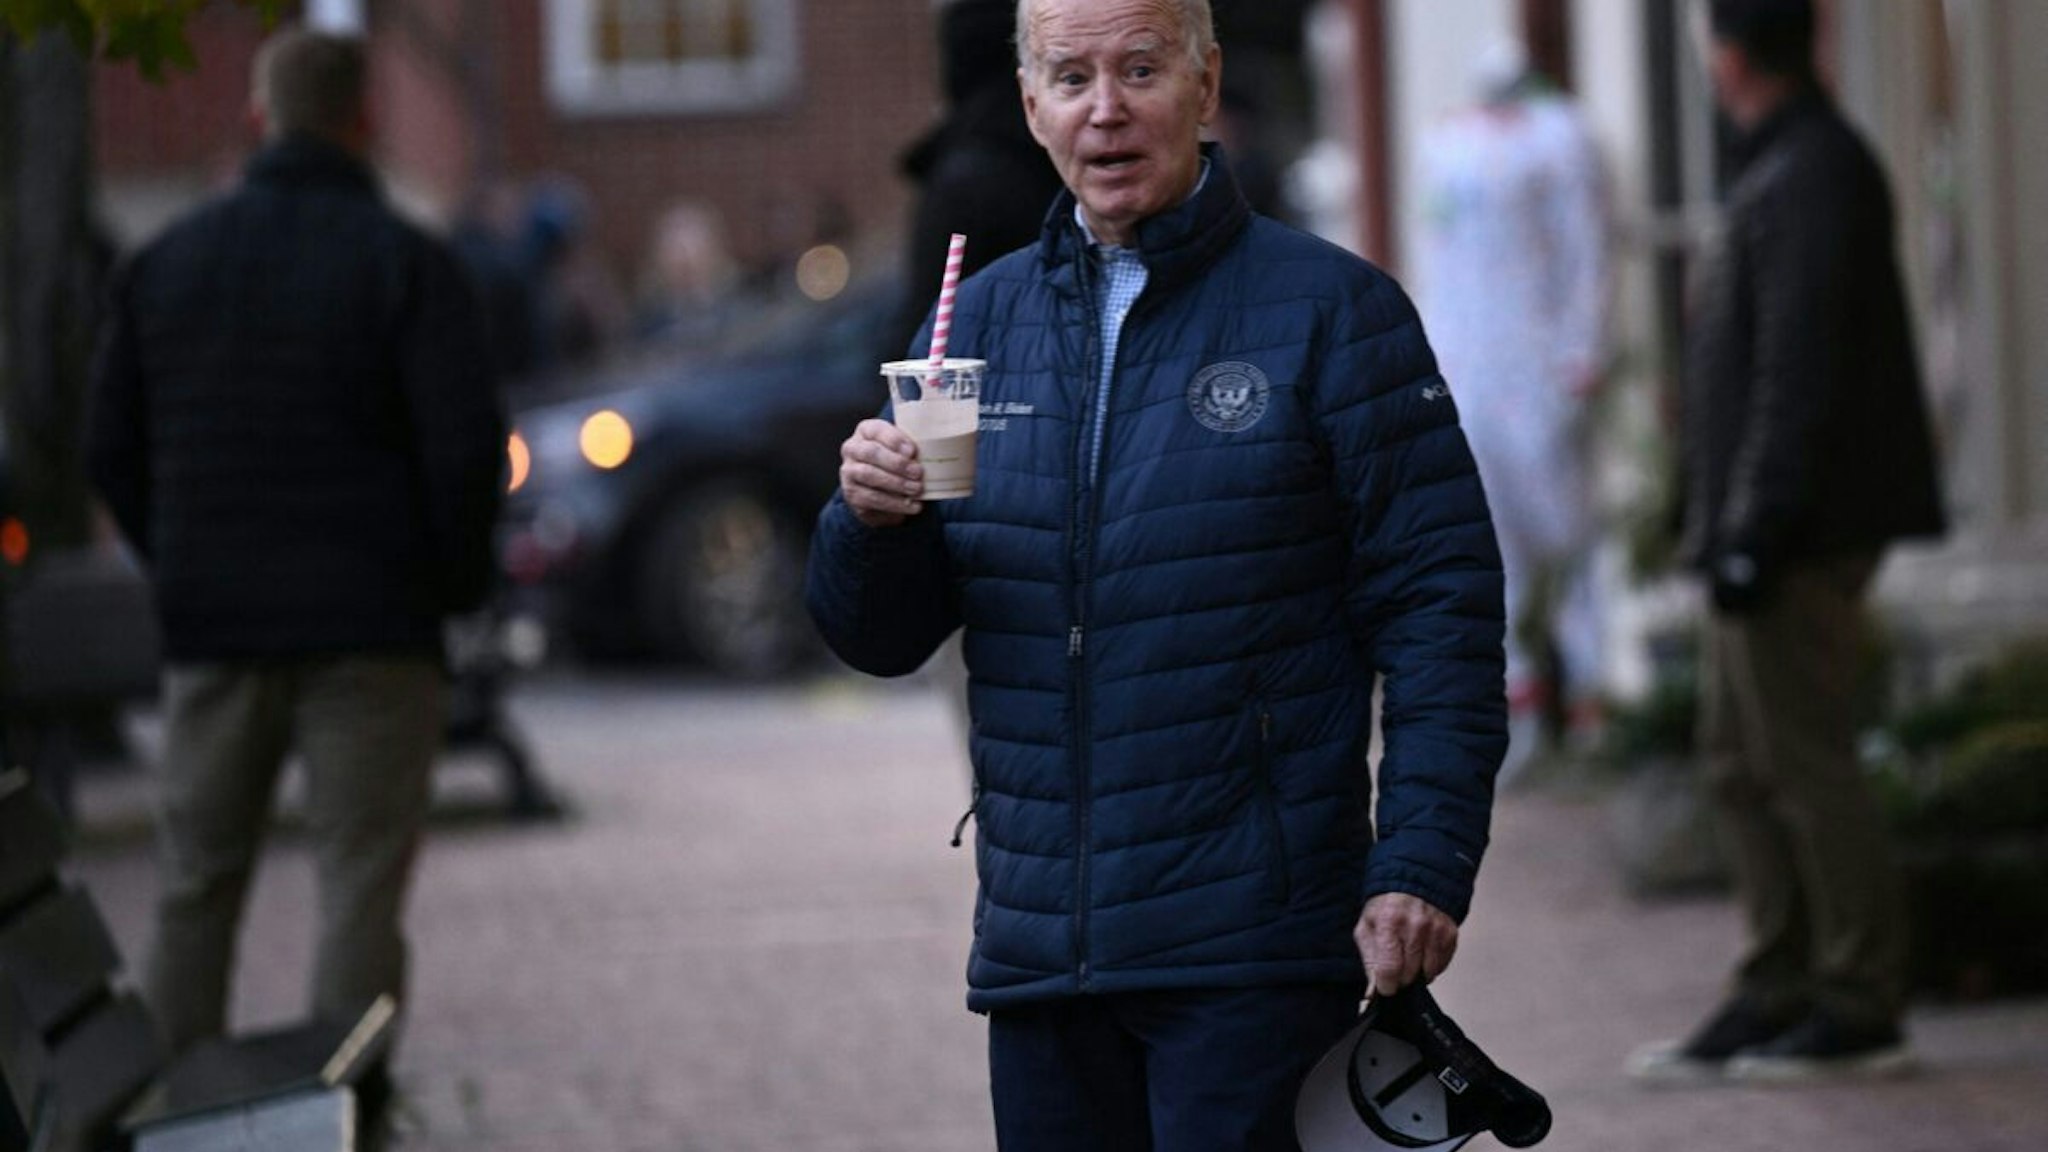 US President Joe Biden carries a drink as he visits local shops with relatives in Nantucket, Massachusetts, on November 25, 2023.